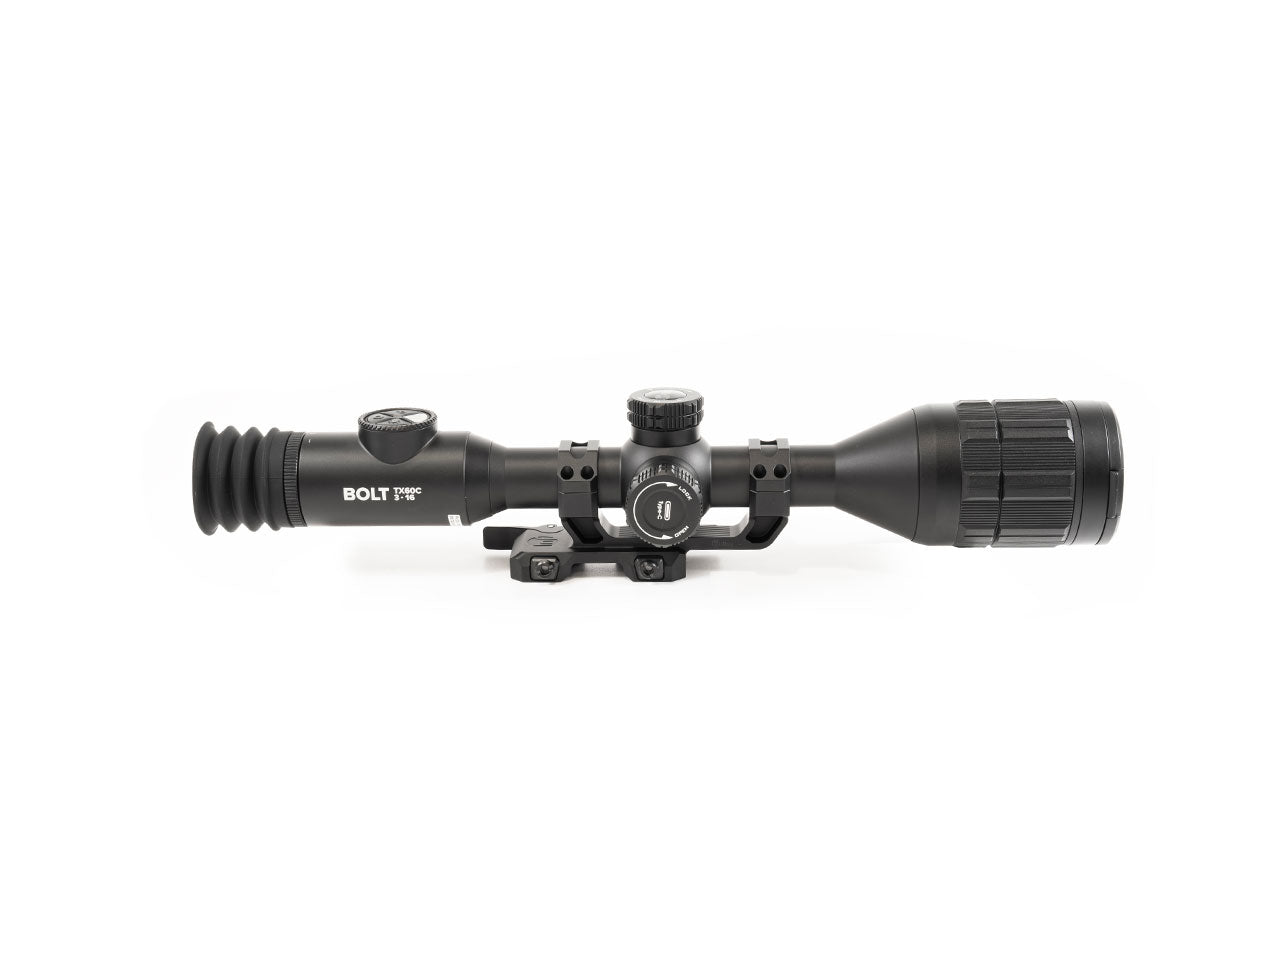 Infiray Outdoor Bolt TX60C 1024 HD 3-16x Thermal Rifle Scope